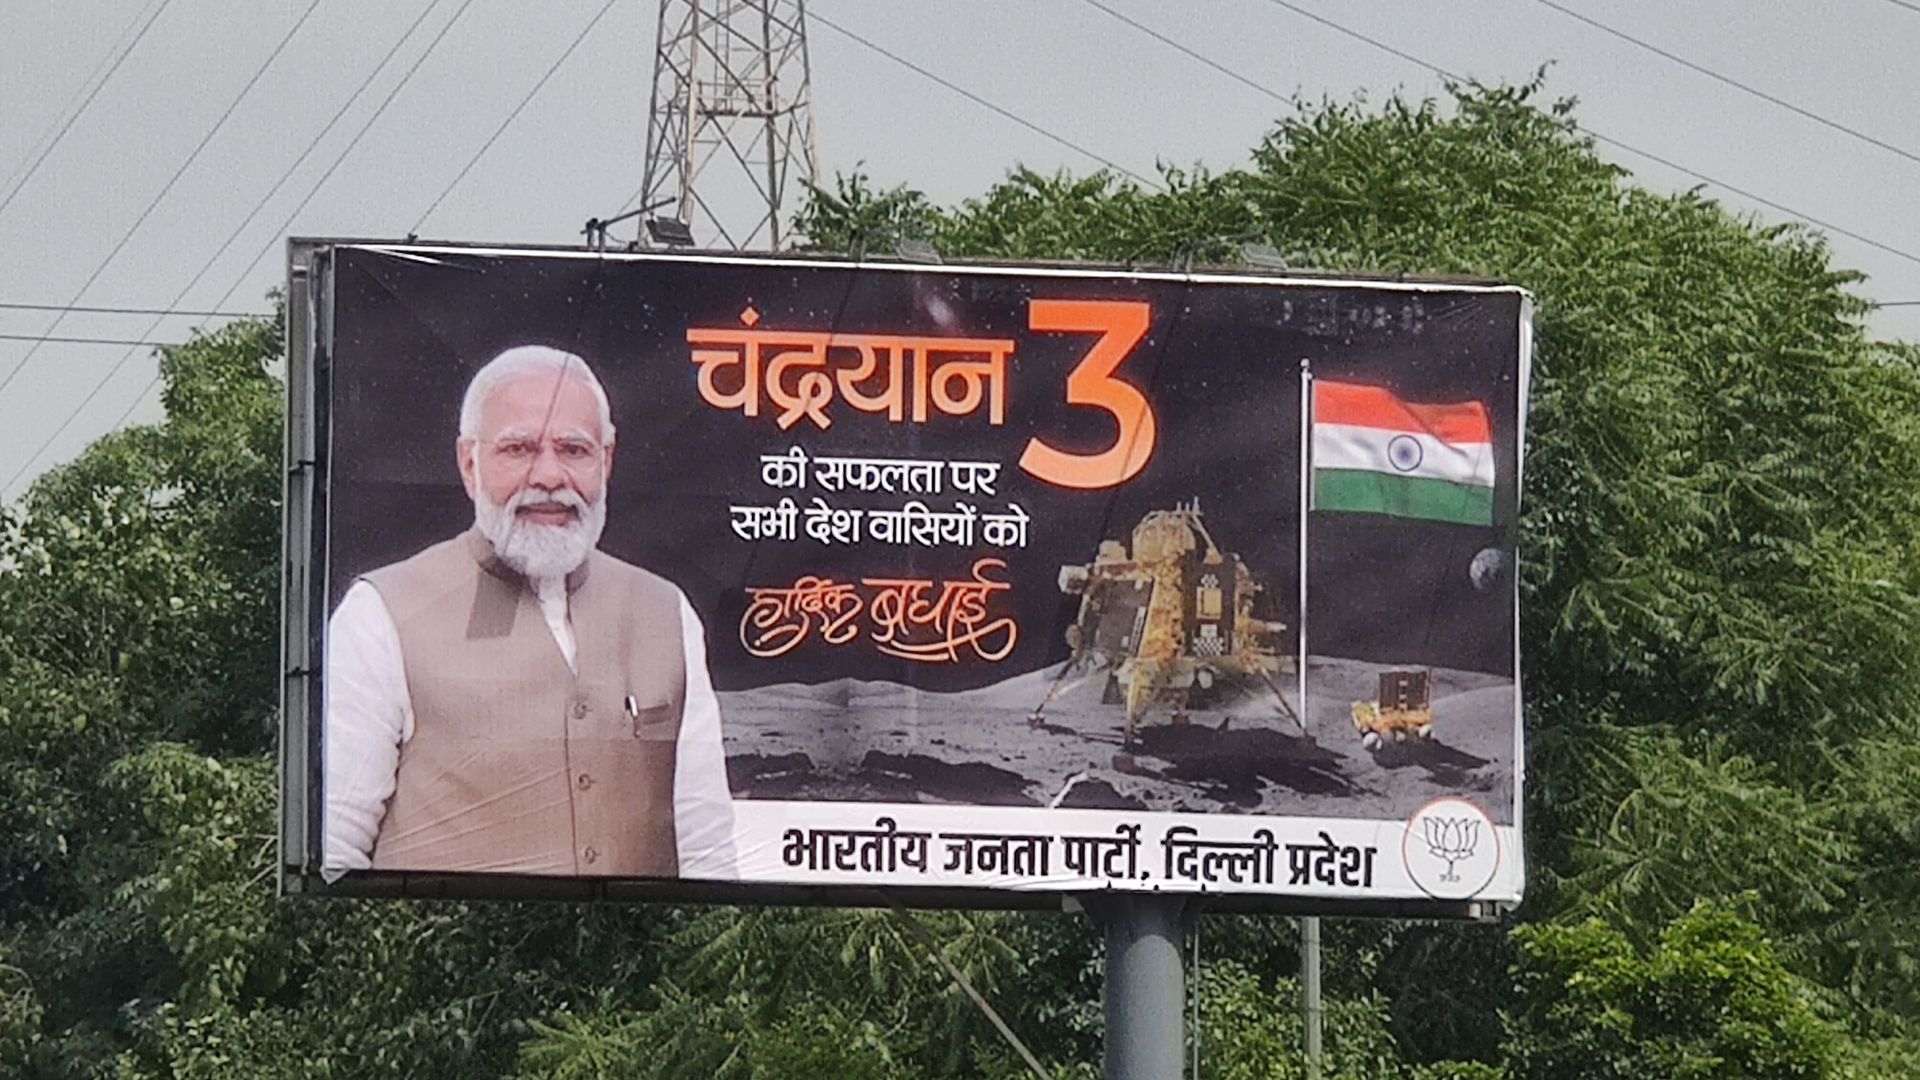 Bill boards adorn street sides in India, as the country of 1.4 billion people celebrates the successful soft landing on the moon surface